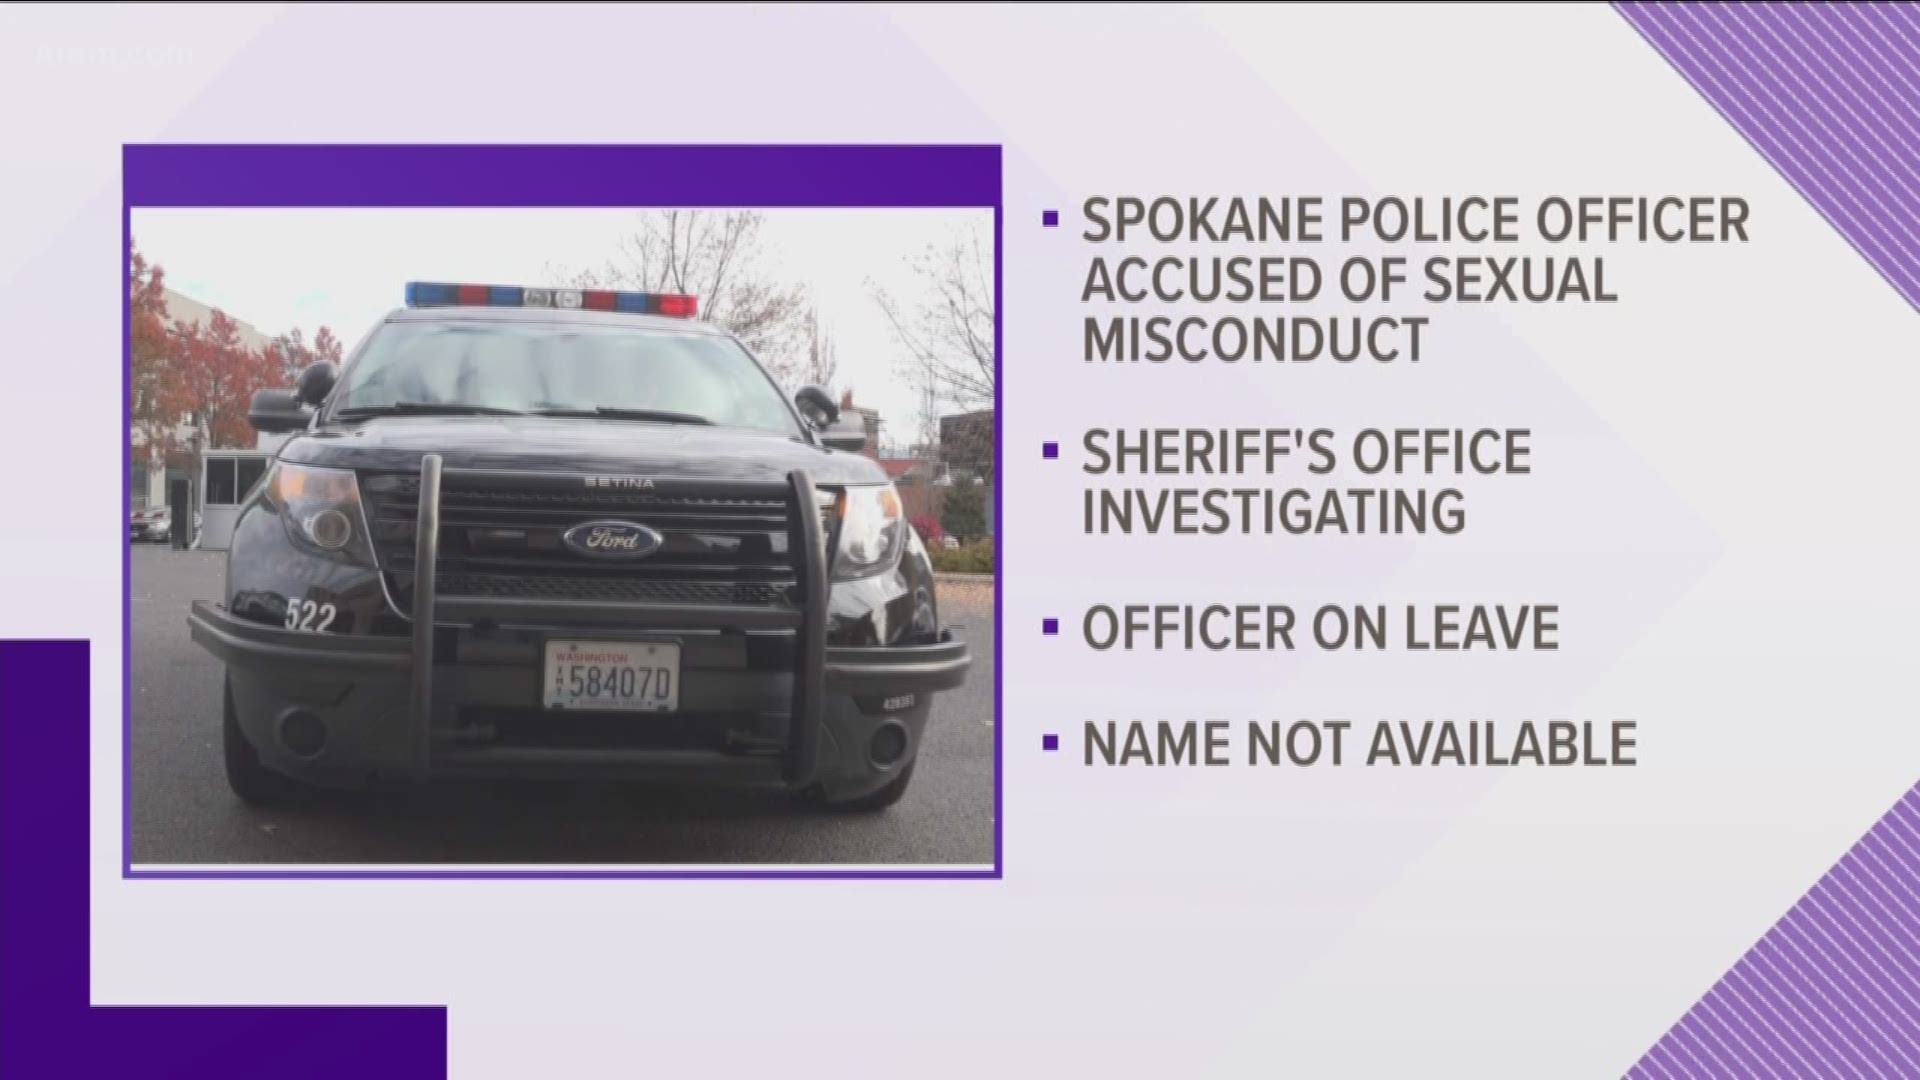 A Spokane police officer is on administrative leave after allegations of sexual misconduct. Now the Spokane County Sheriff's Office is investigating.